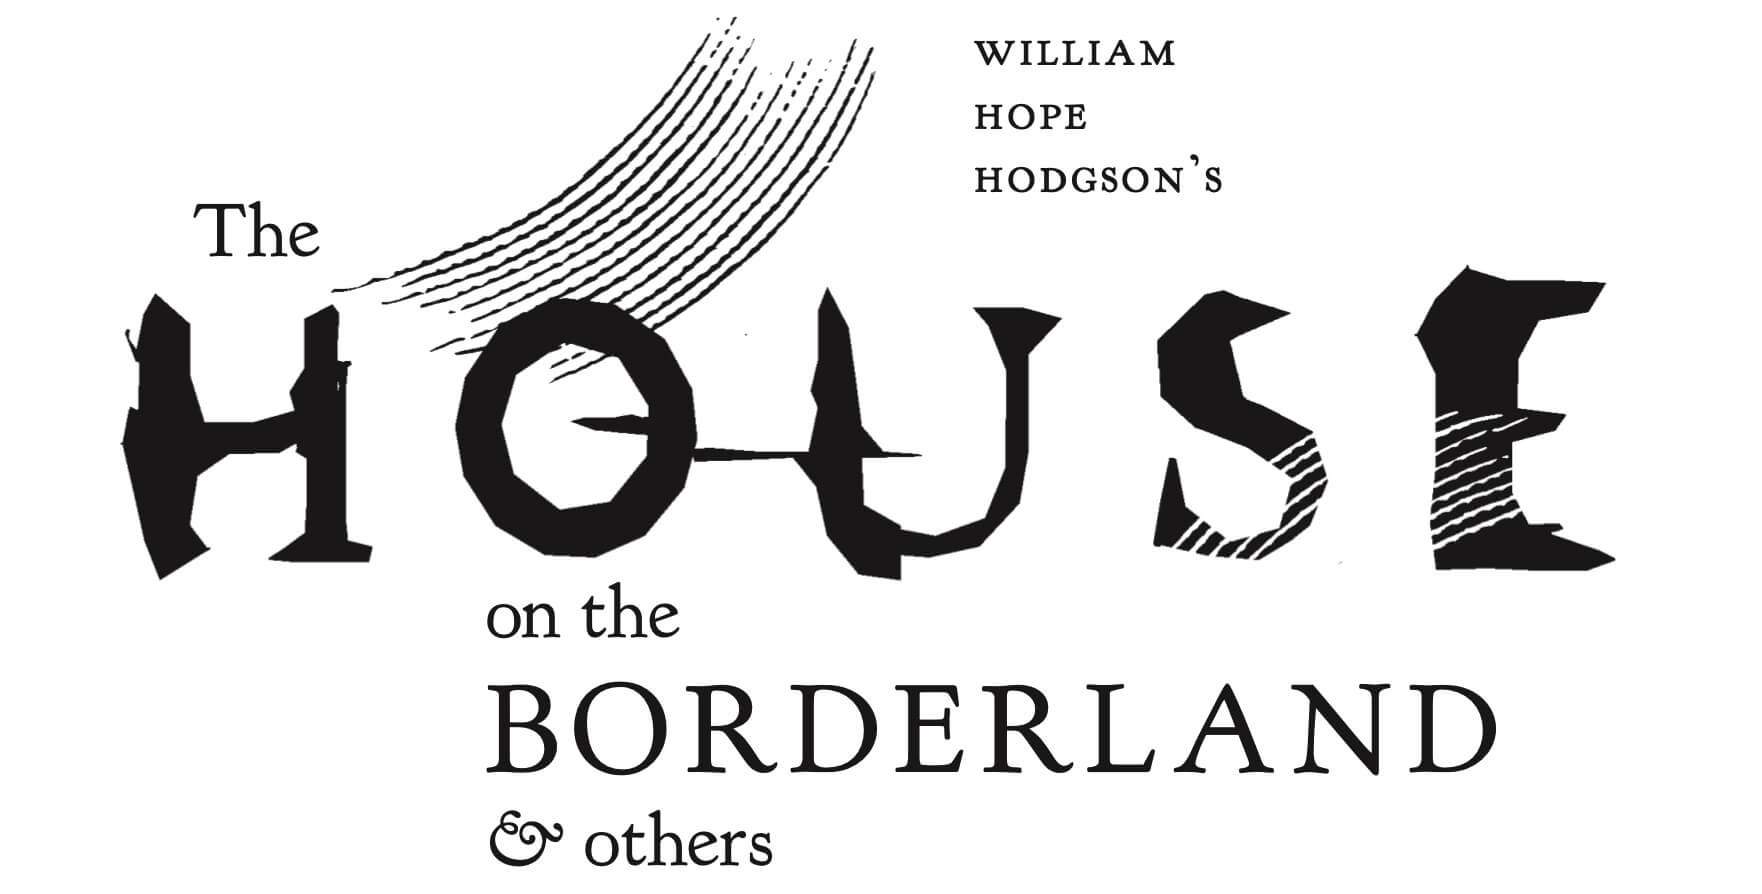 William Hope Hodgson's The House on the Borderland & Others